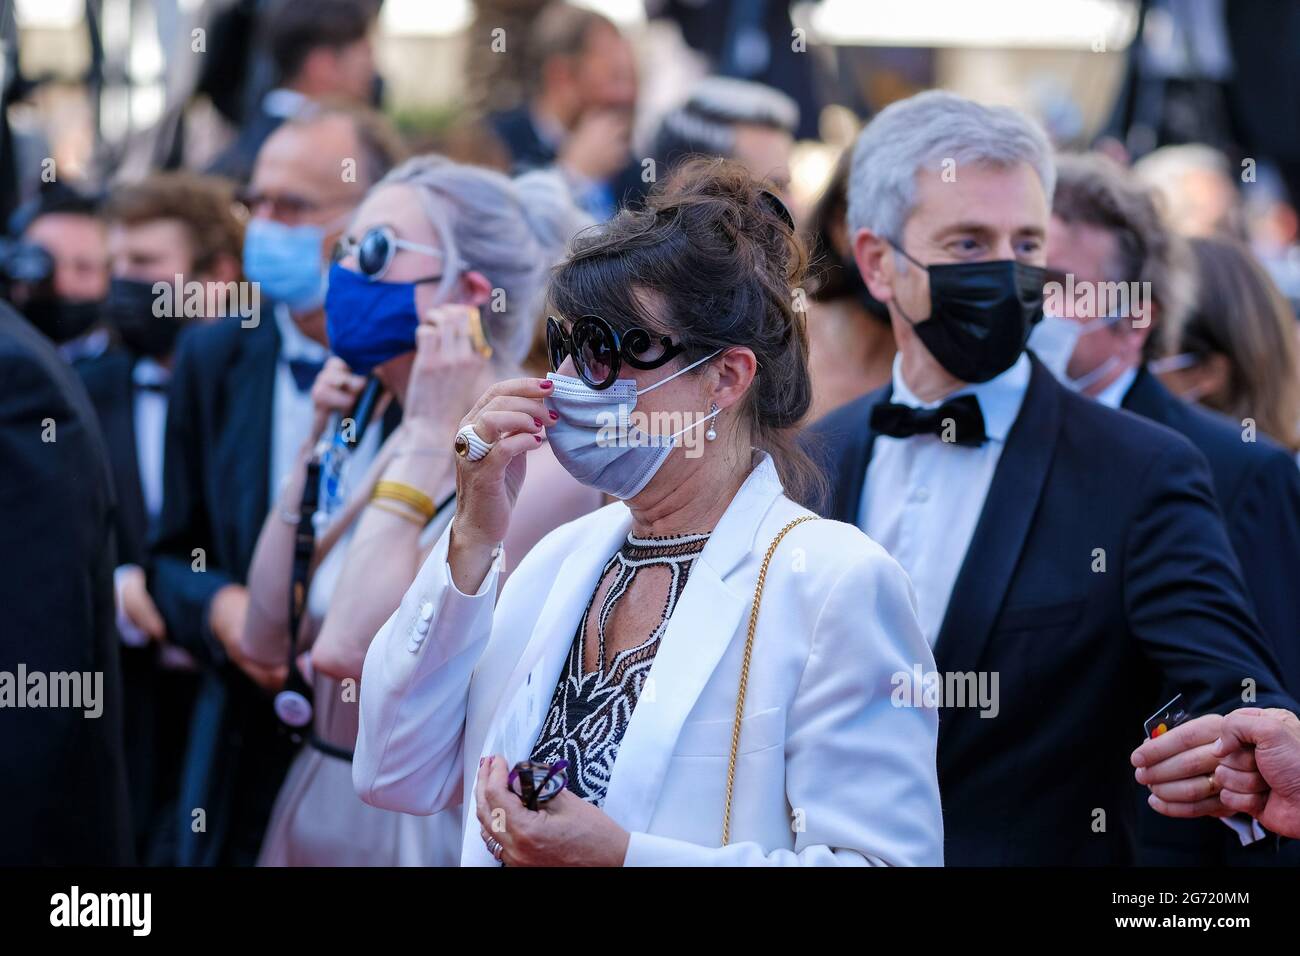 Cannes, France. 09th July, 2021. Palais des festivals, Cannes, France. 9th July, 2021. Festival attendees in masks attends the 'Benedetta' Red Carpet. All attendees to the festival are required to wear masks in the Palais des festivals including on the red carpet. They are removed for photographs to be taken. Picture by Credit: Julie Edwards/Alamy Live News Credit: Julie Edwards/Alamy Live News Stock Photo